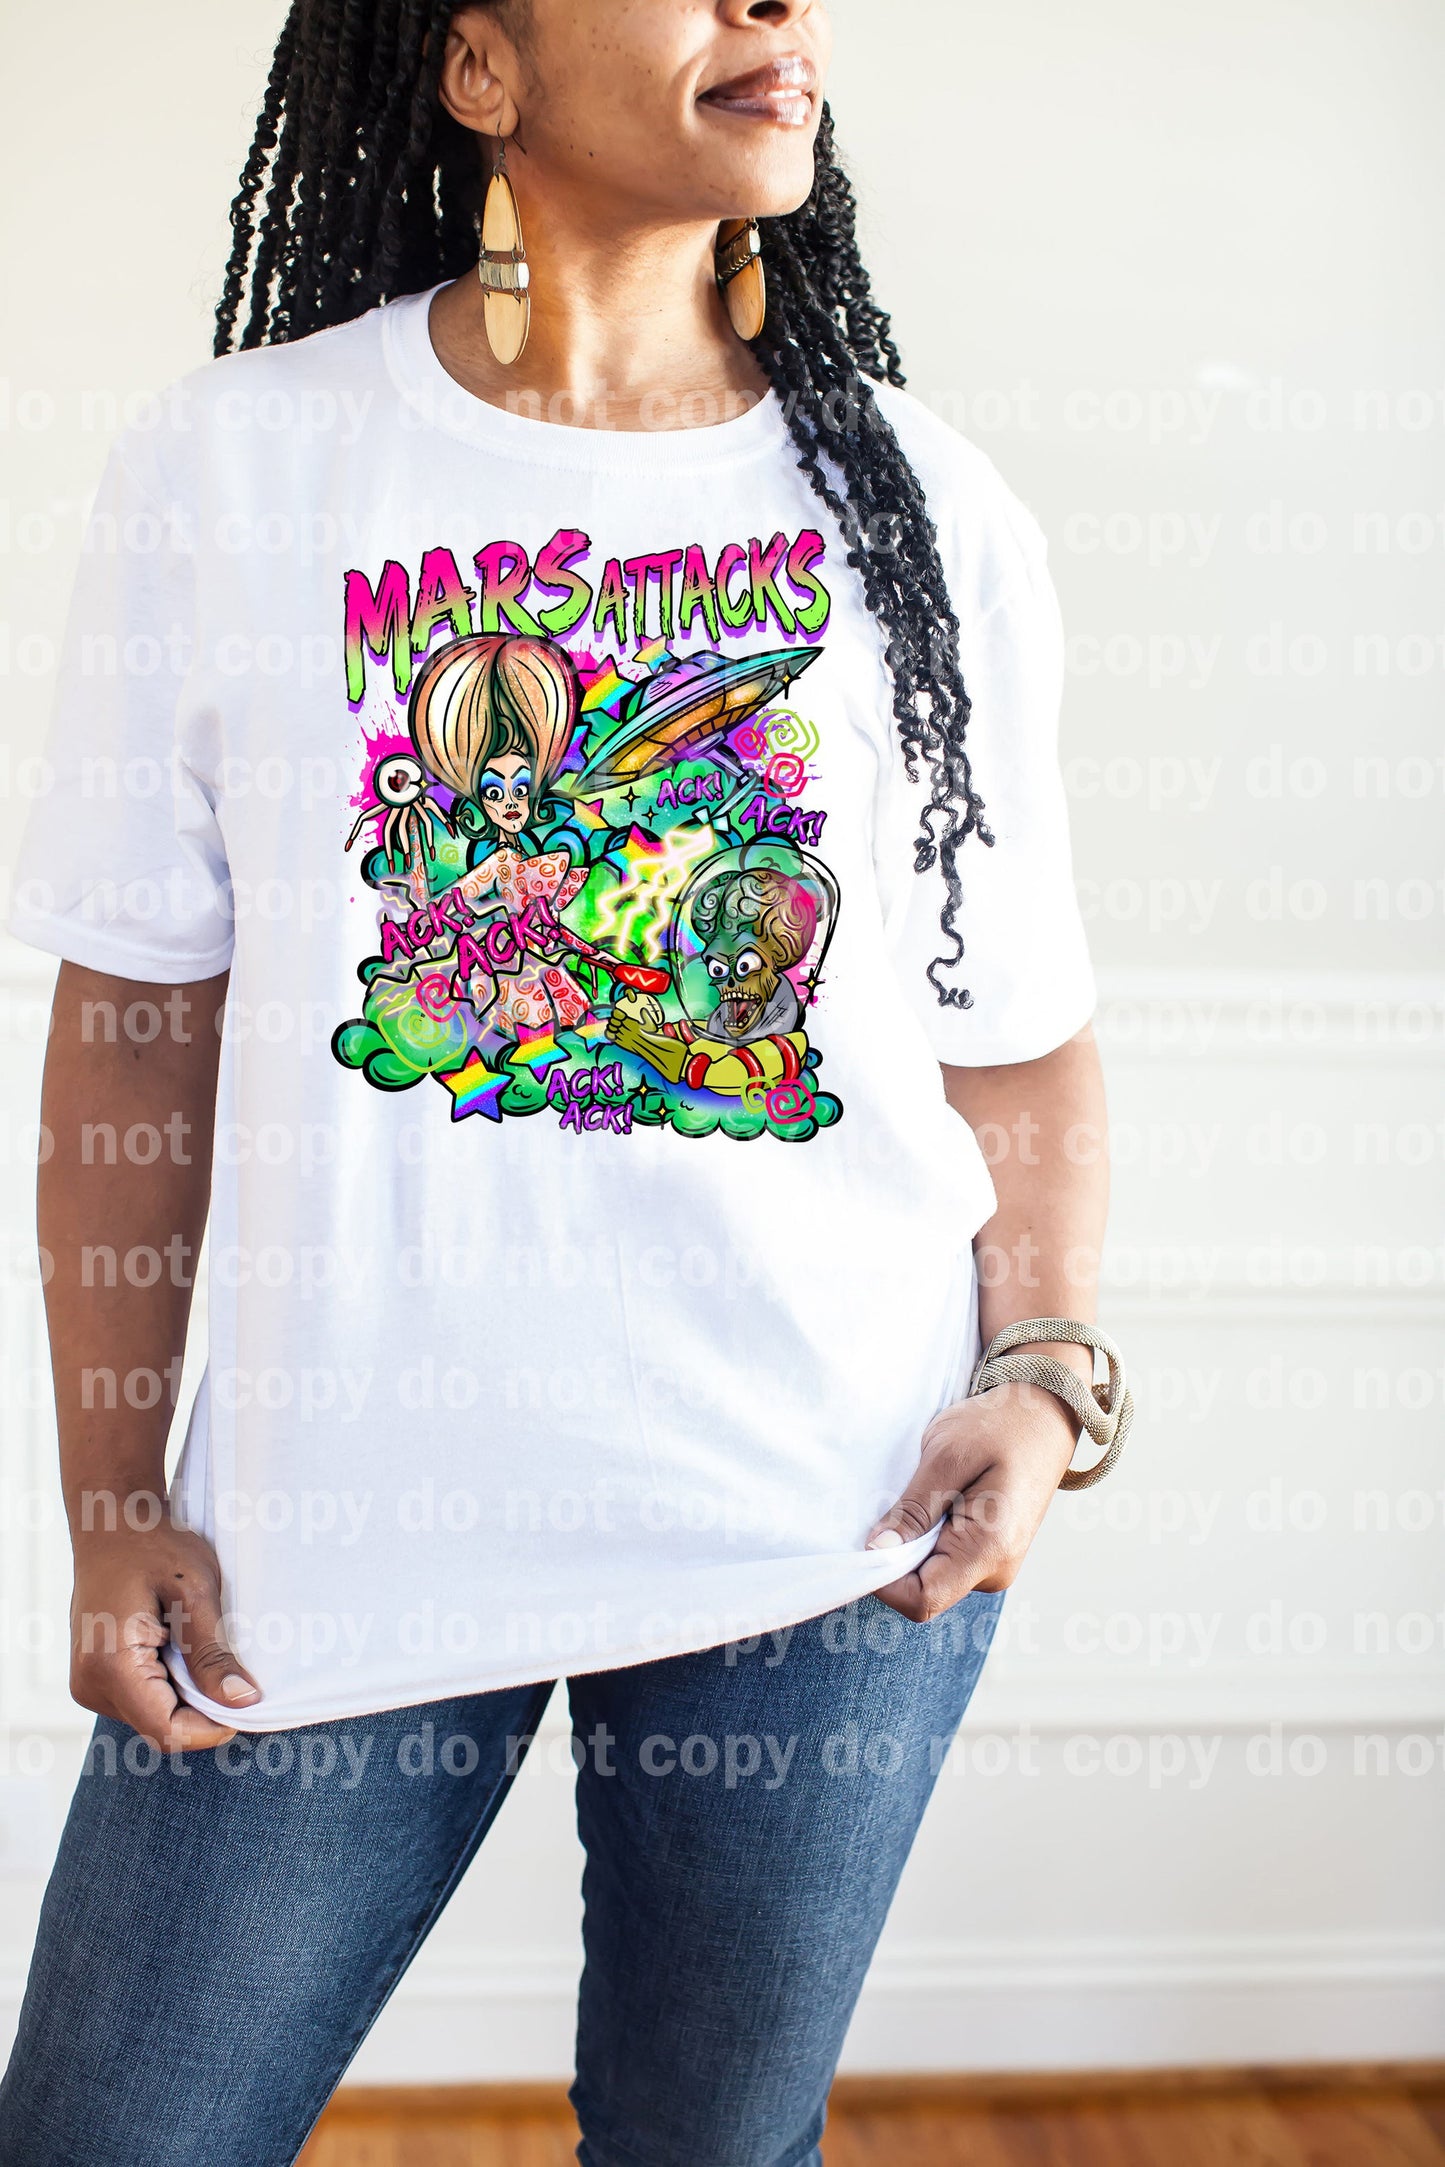 Mars Attacks With Words Colored